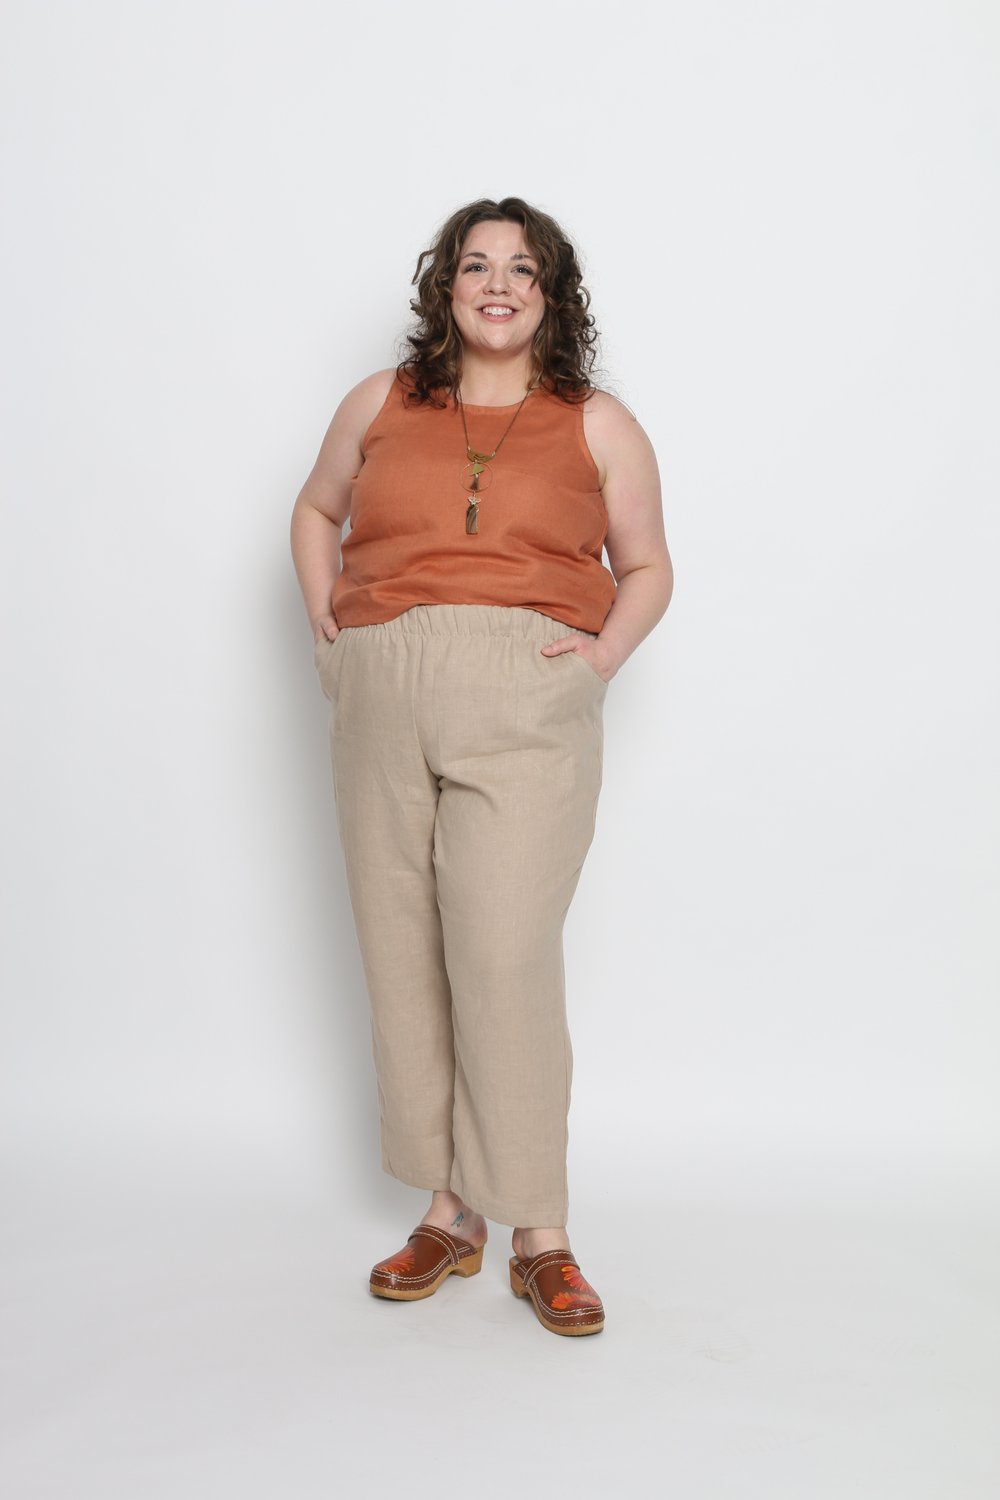 Amber is wearing an XL. Her measurements are: Height 5&#39;7&quot; | Bust 49&quot; | Waist 47&quot; | Hip 53&quot;